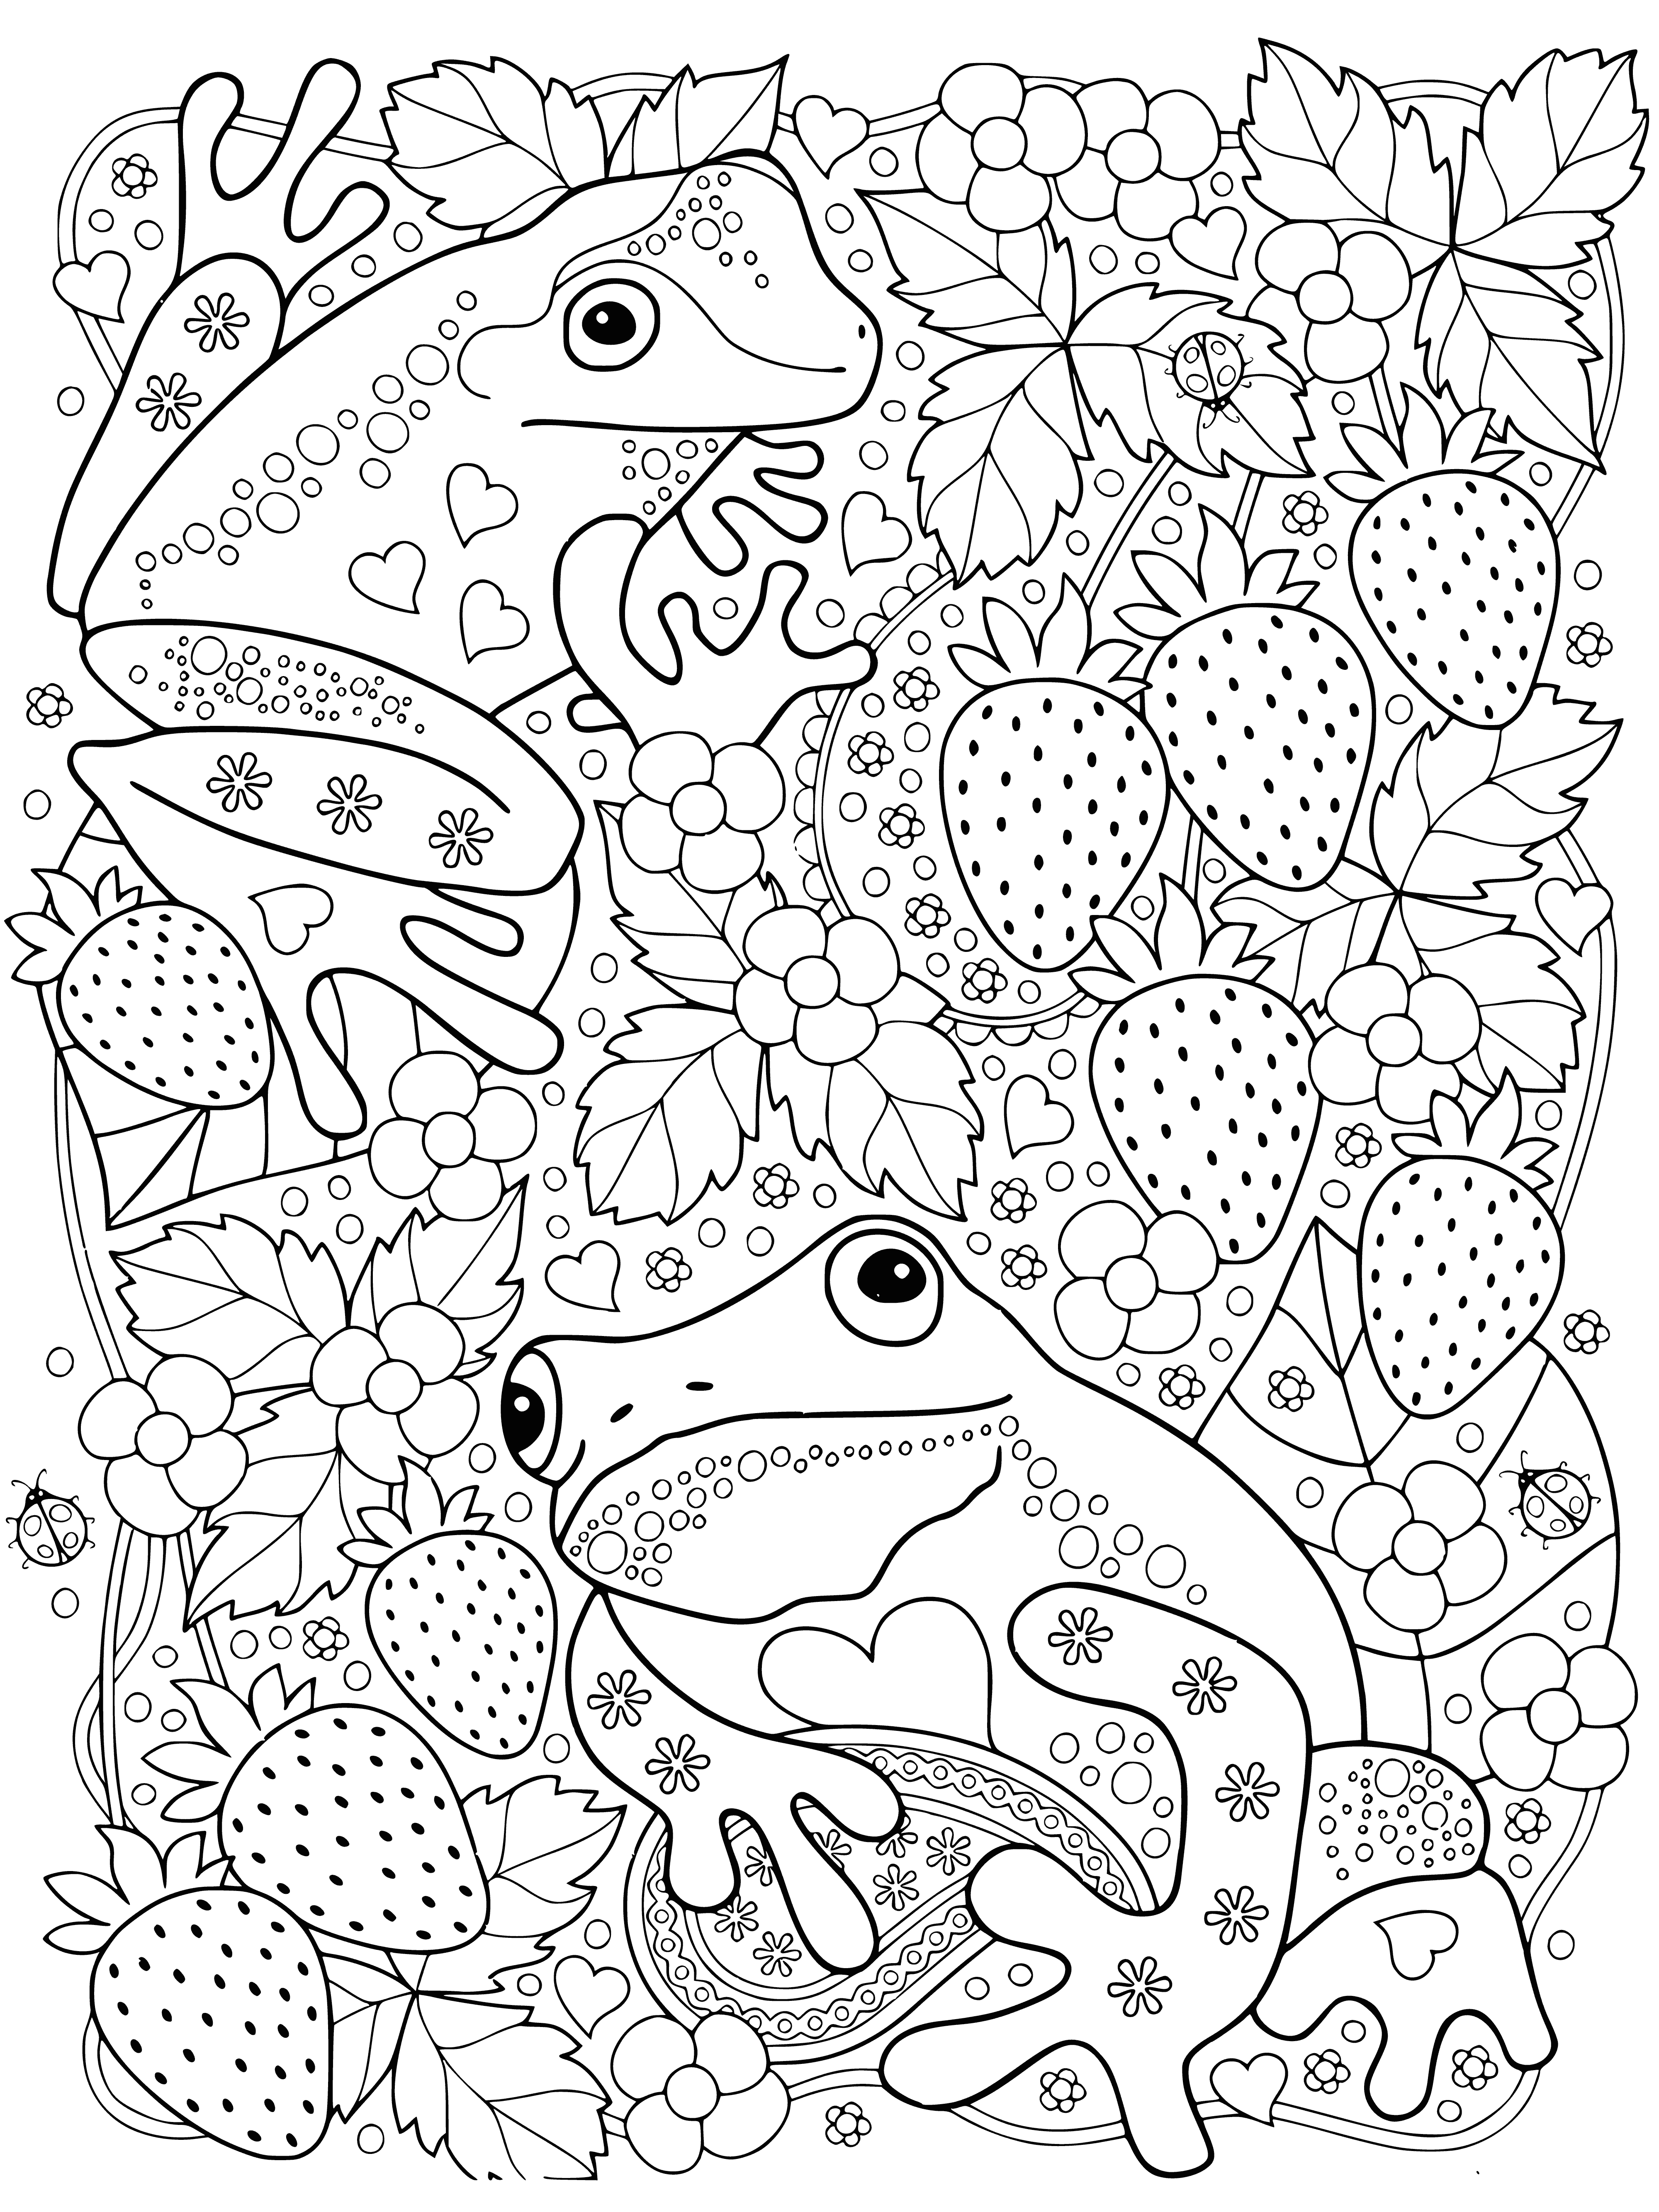 coloring page: Two frogs relax on lily pads, one with a strawberry & one with closed eyes, surrounded by flowers & greenery.